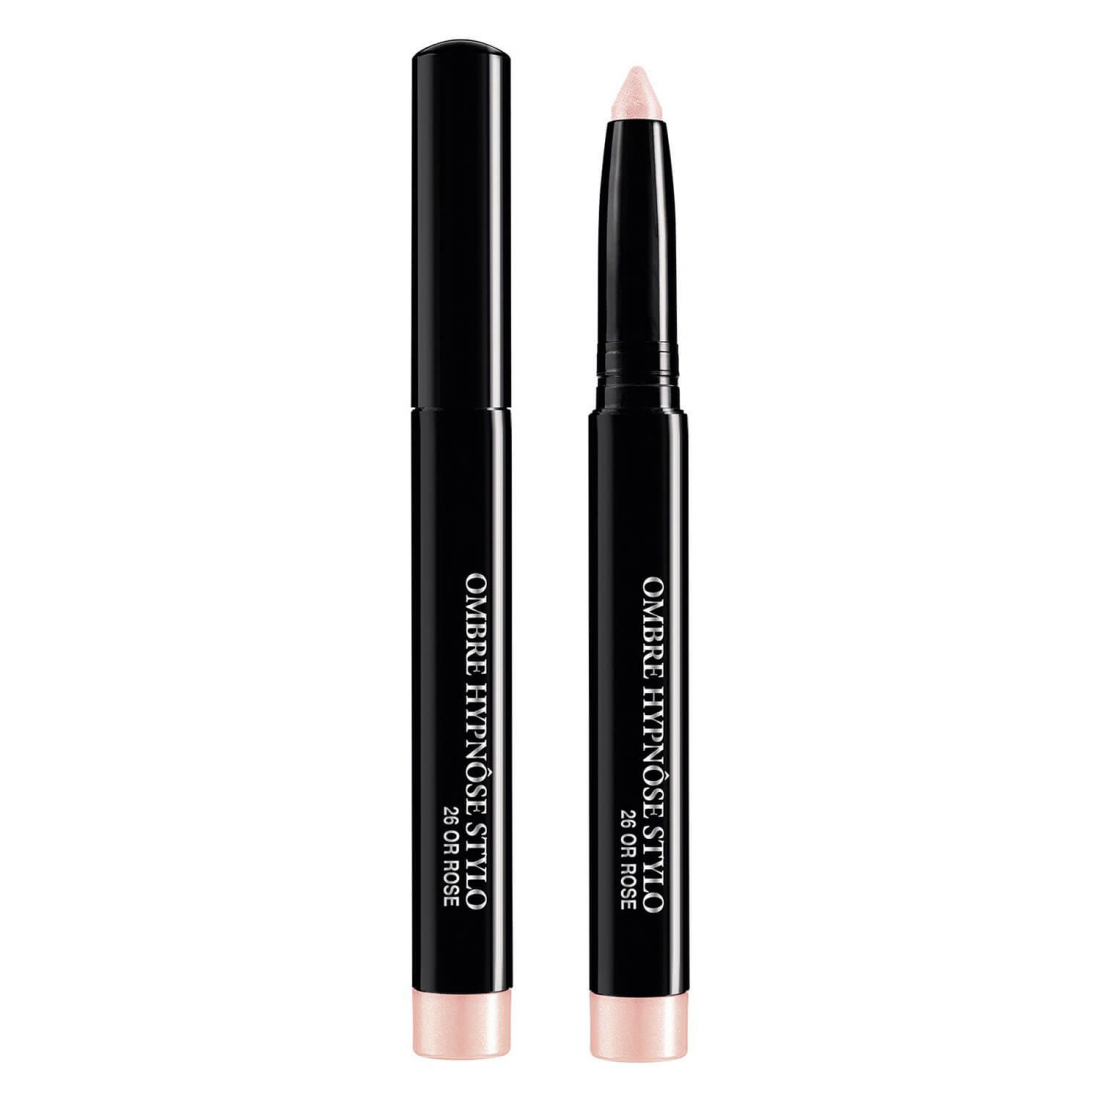 'Ombre Hypnôse Stylo' Eyeshadow Stick - 26 Or Rose 1.4 g